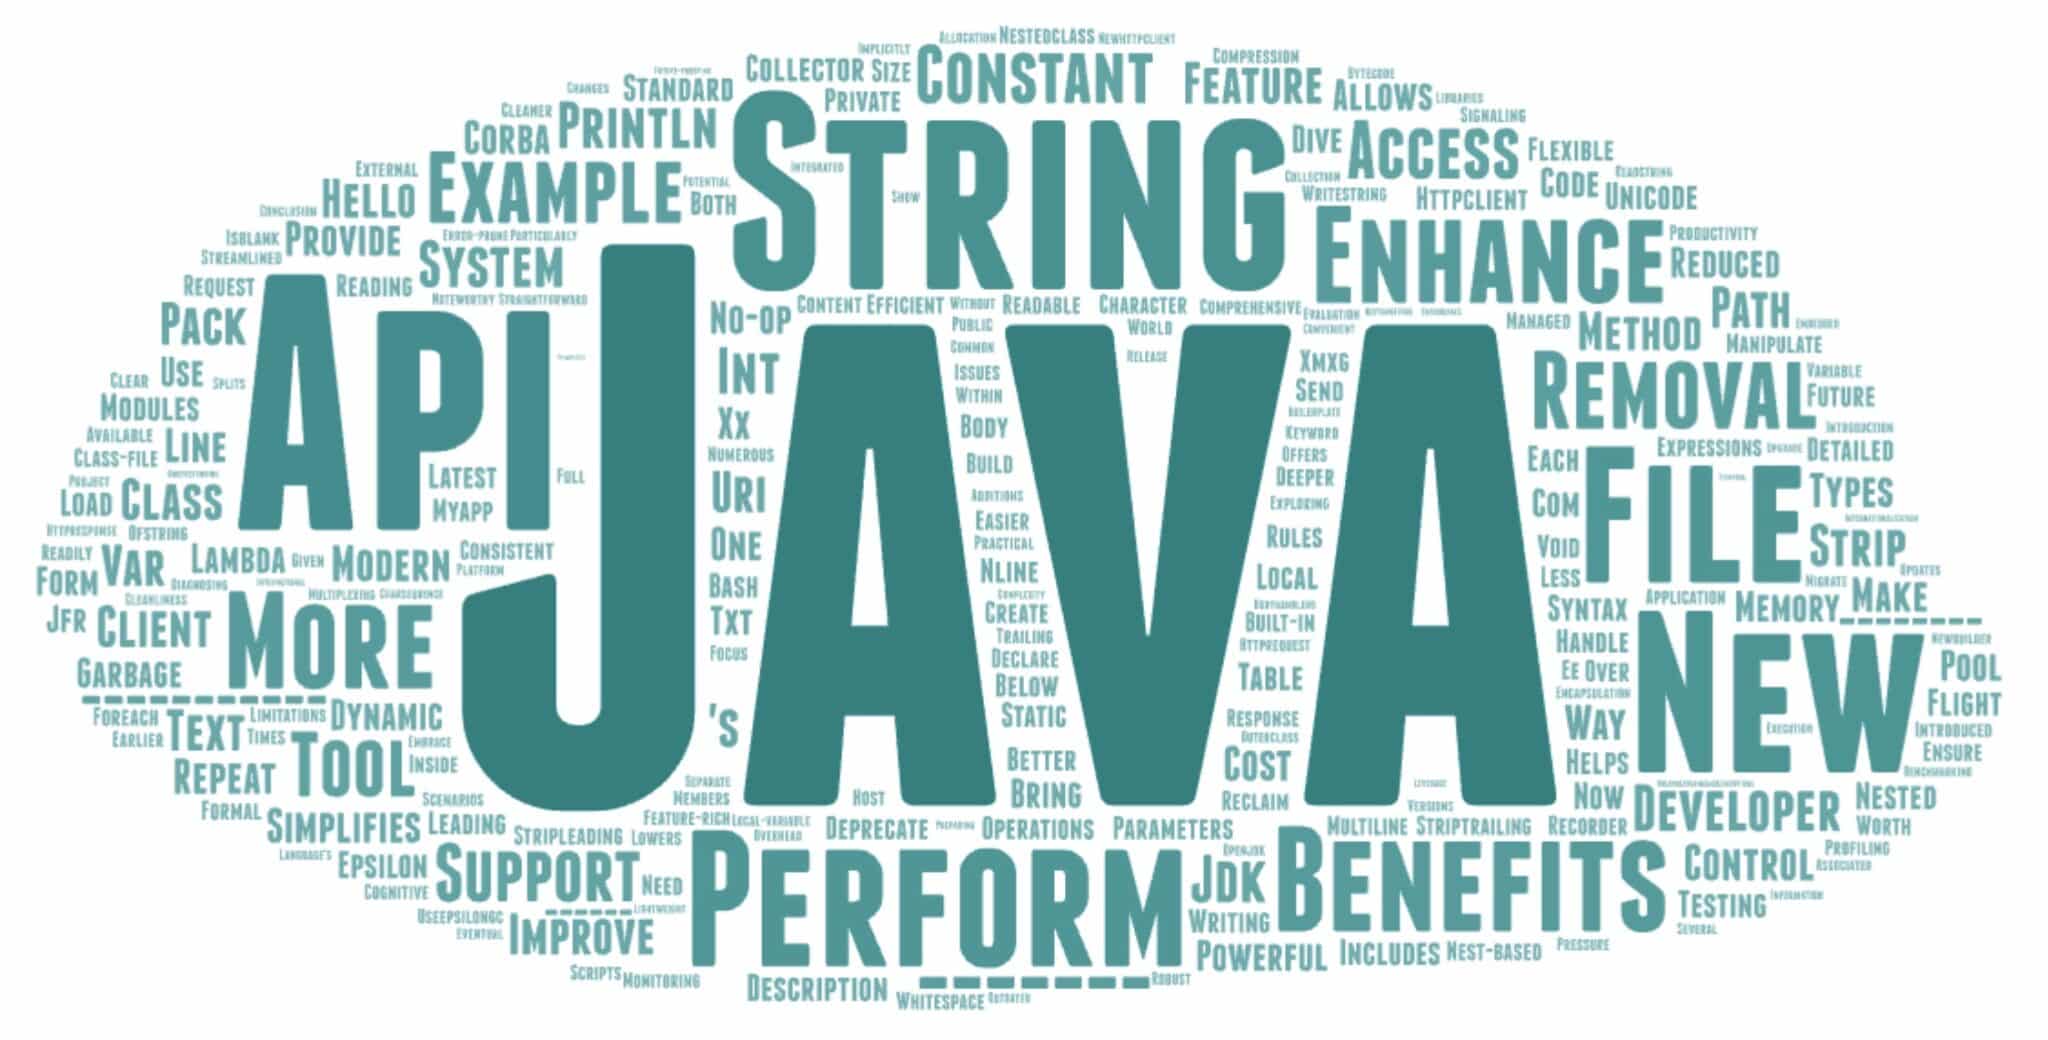 What’s New in Java 11?